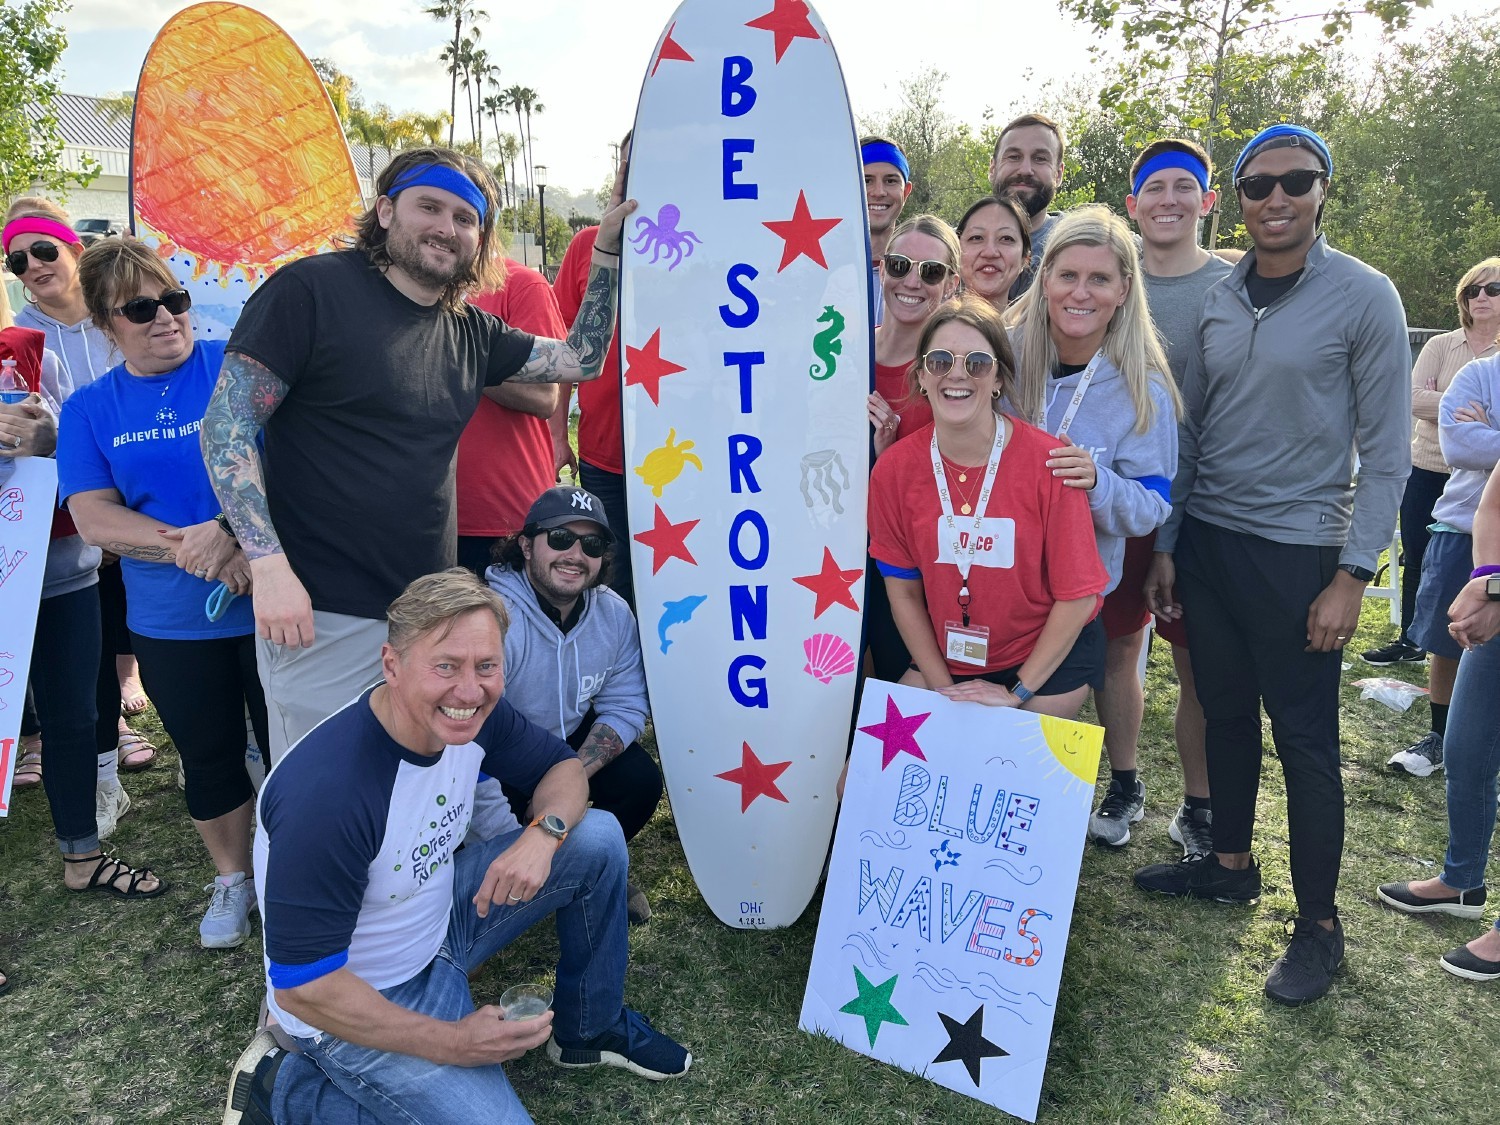 Sales teams donated surf boards to a non-profit that promotes surf therapy to physically and mentally wounded veterans.